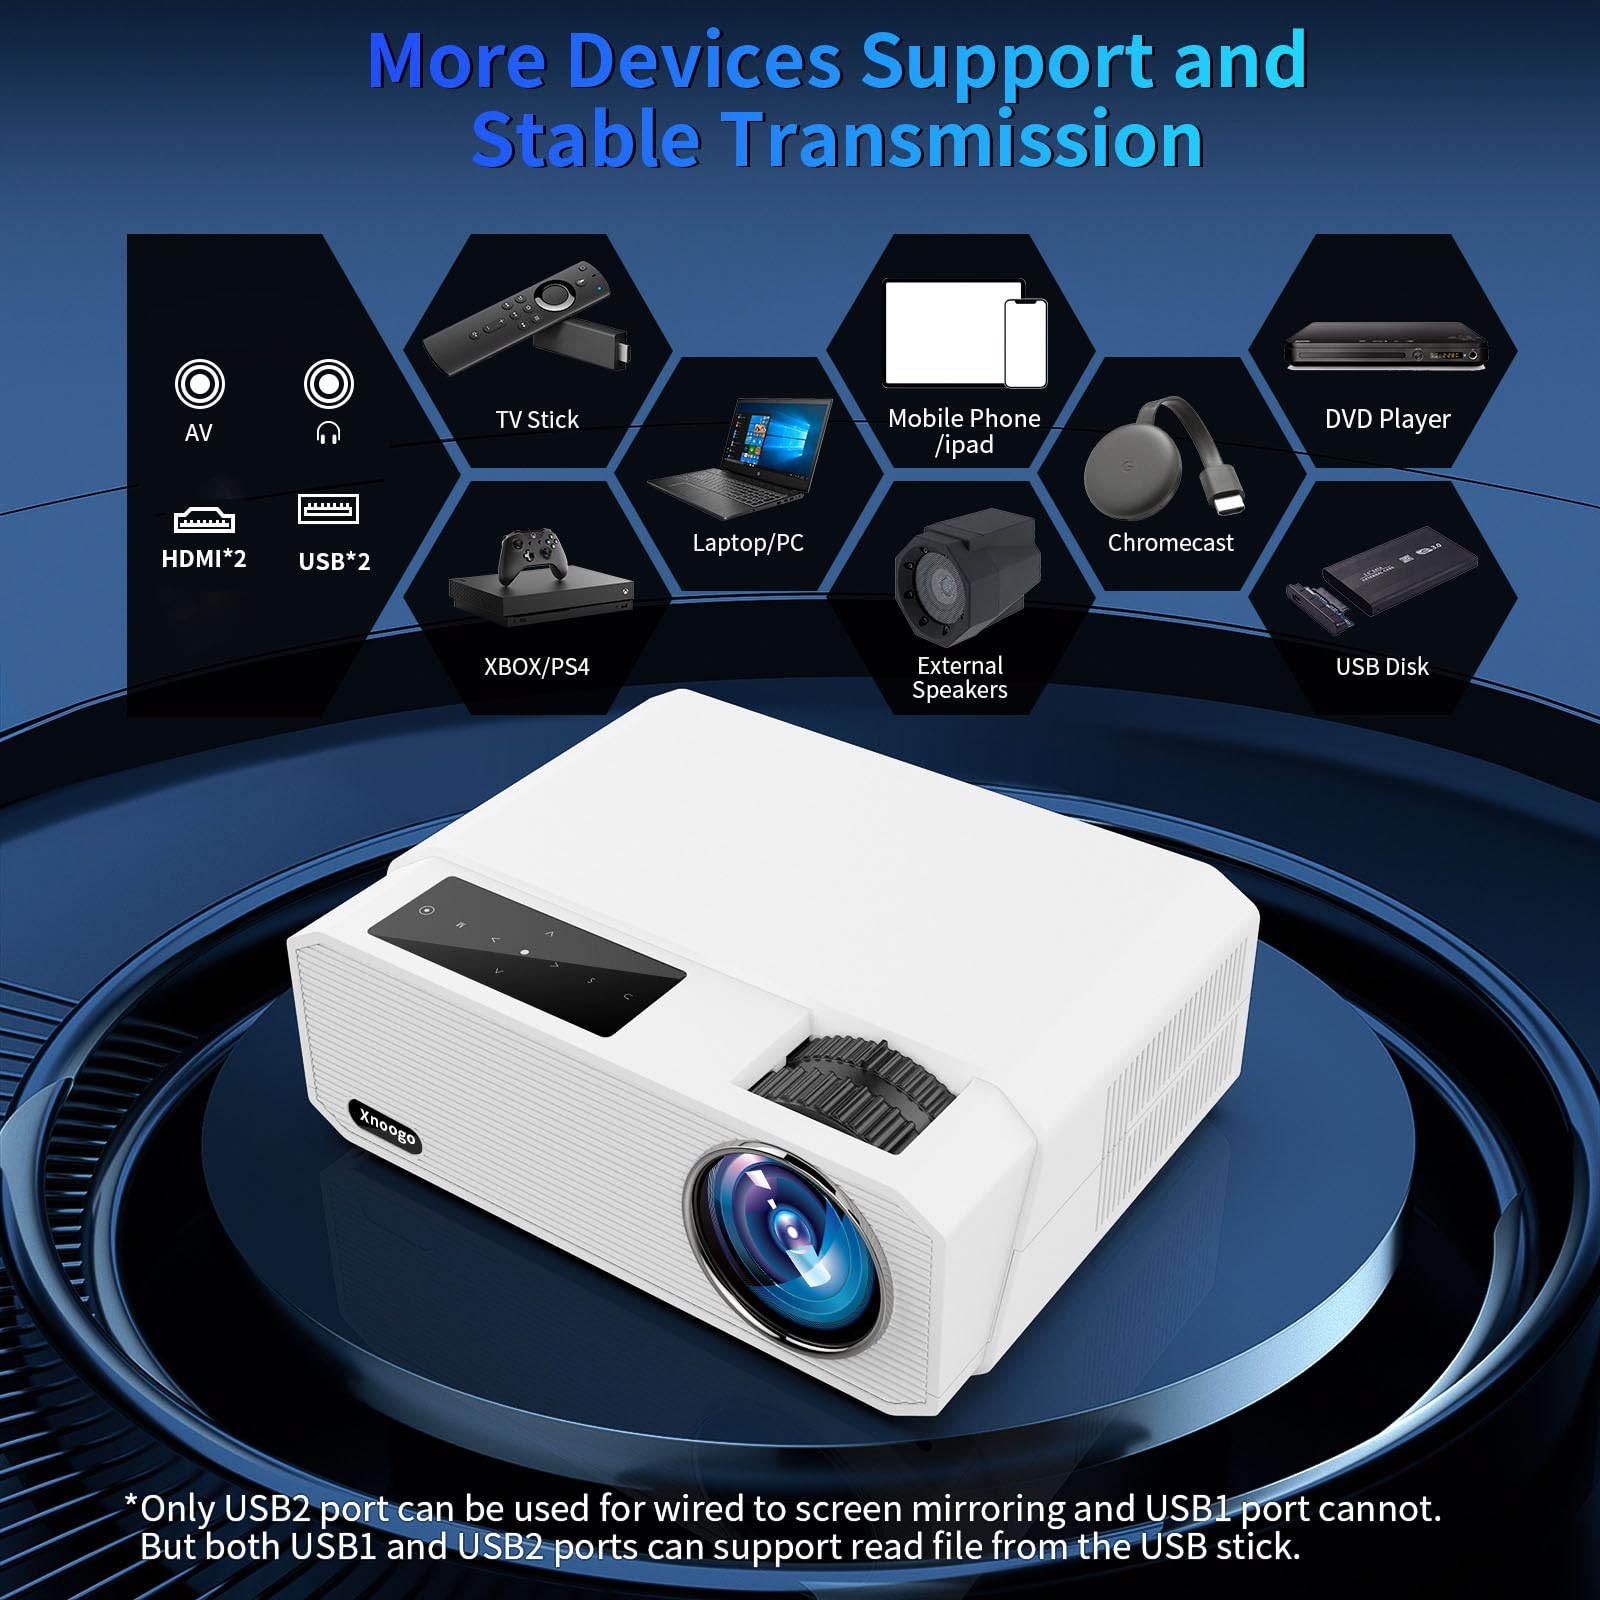 Outdoor Projector 4k with WiFi and Bluetooth,XNoogo 900 ANSI 4k Movie Projector Support 6D/4P Correction,PPT,Dolby,60